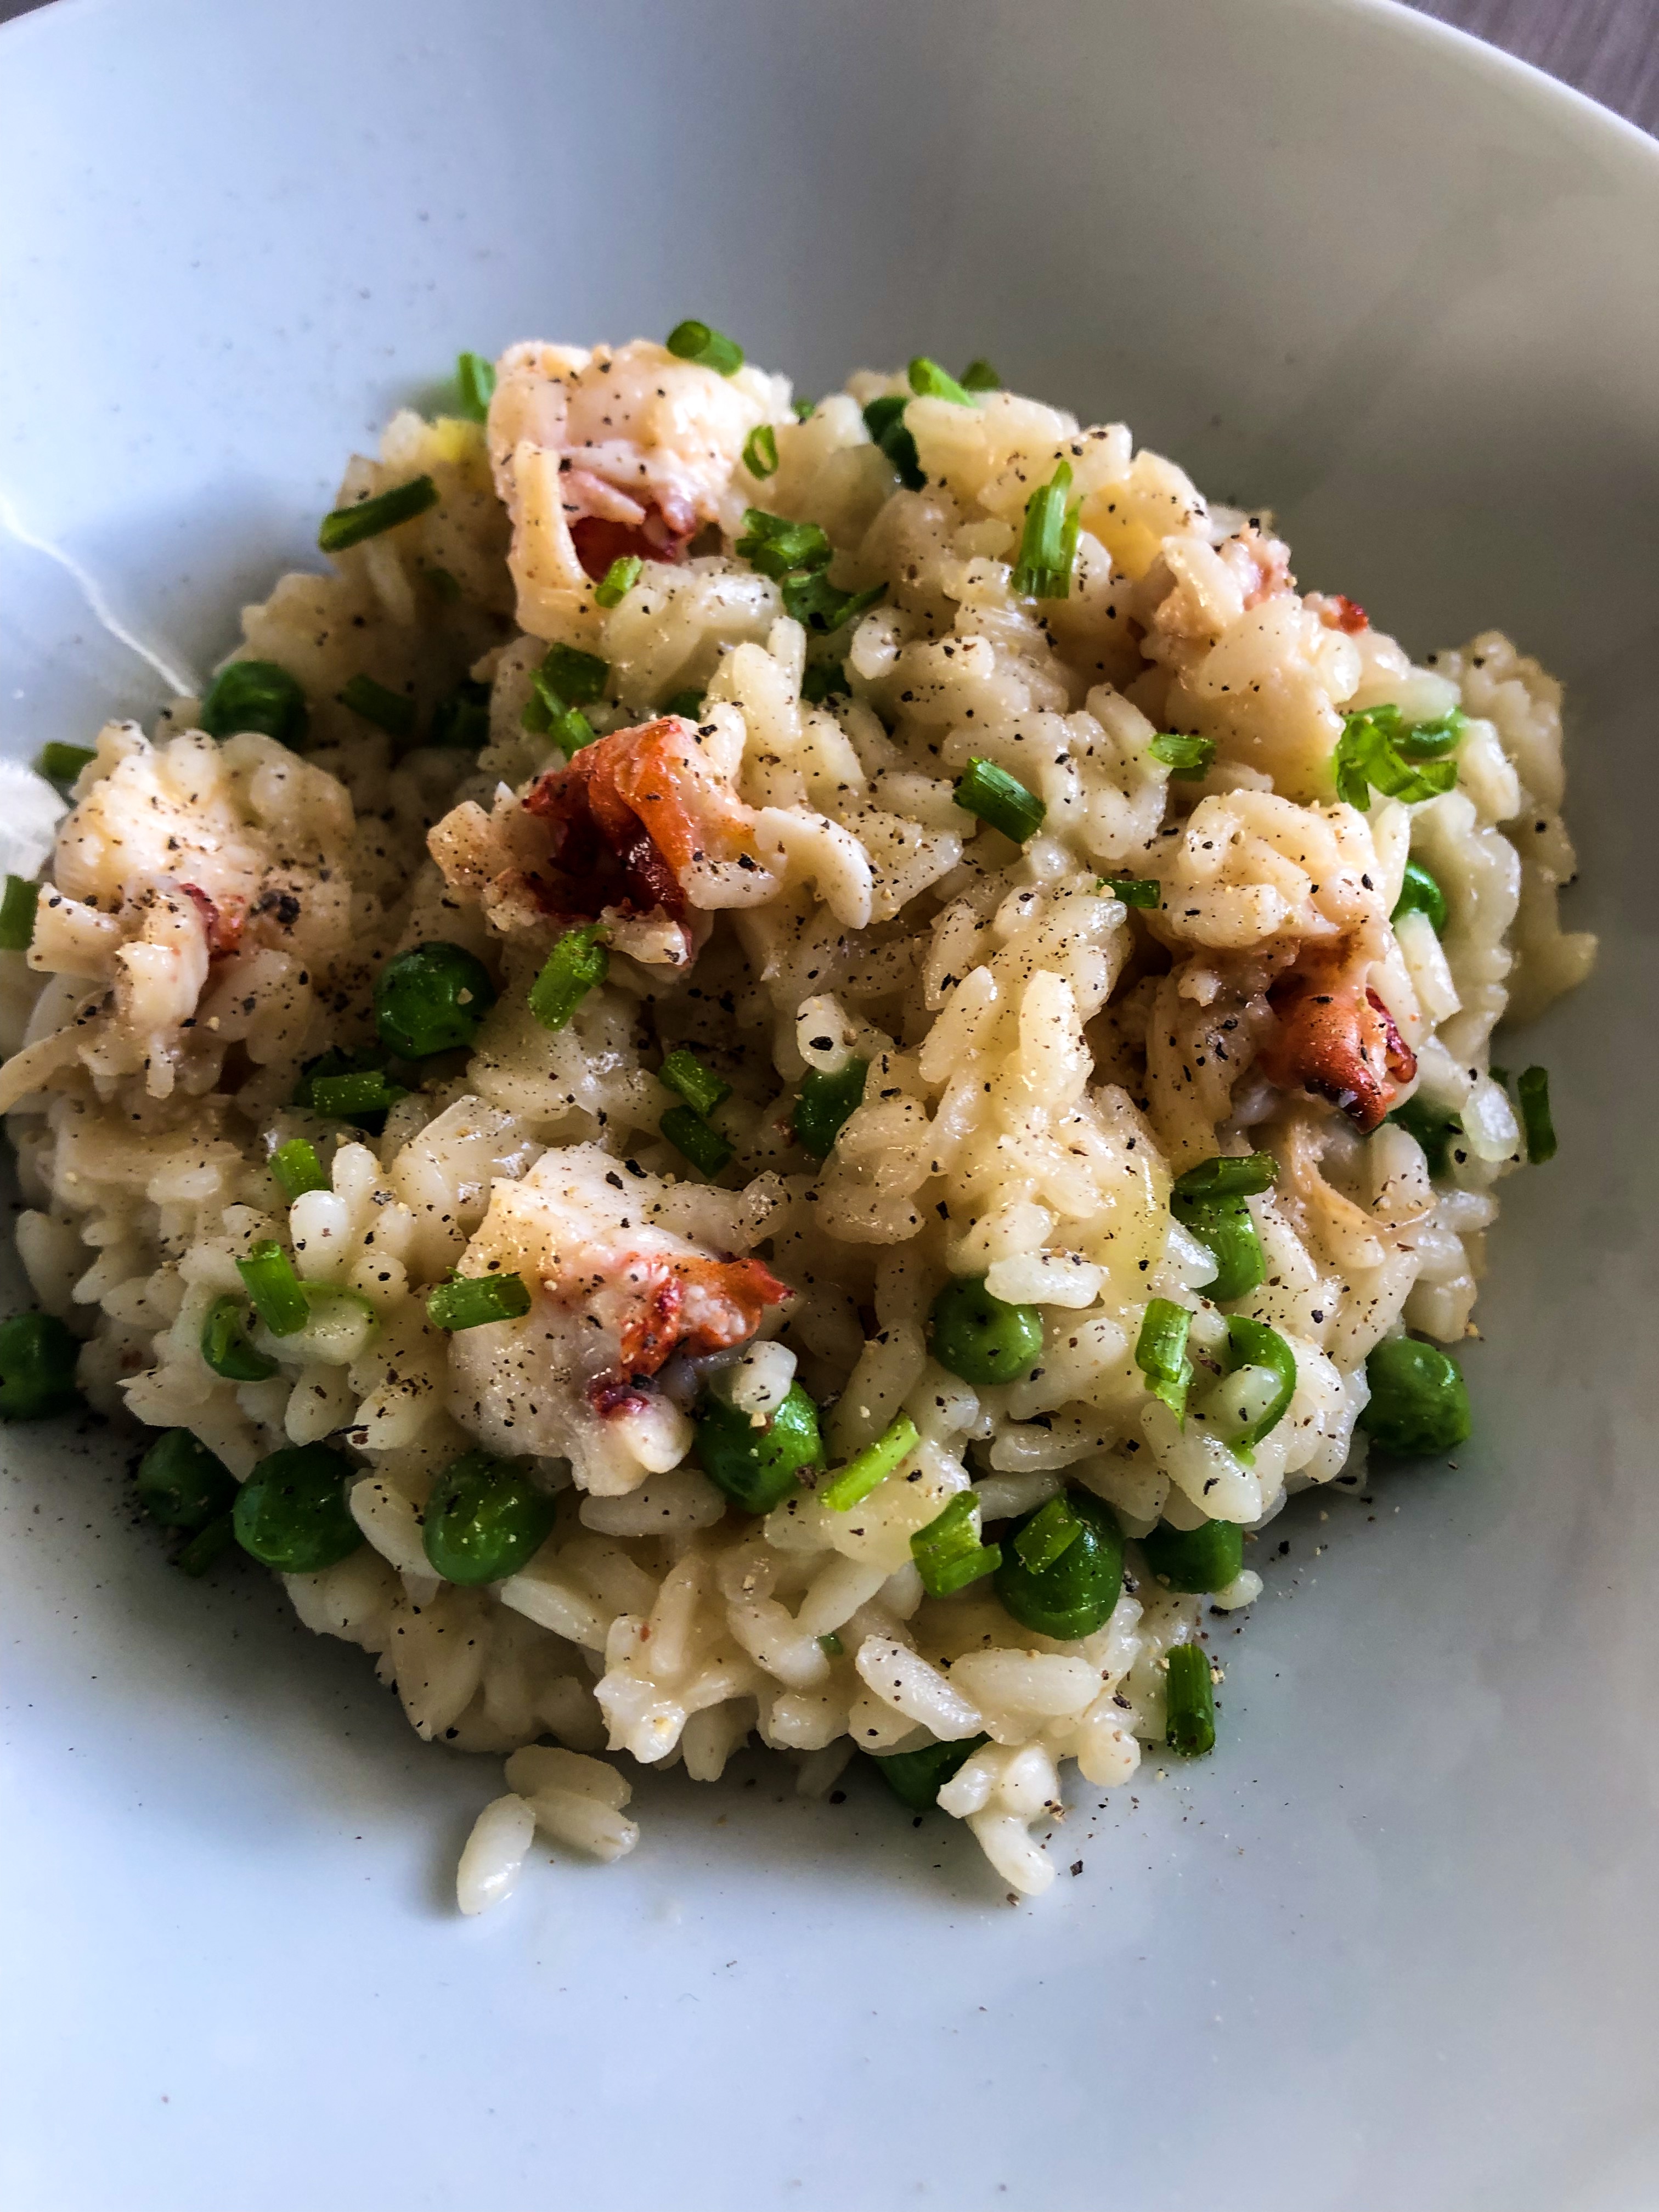 Lobster risotto with Parmesan and green peas